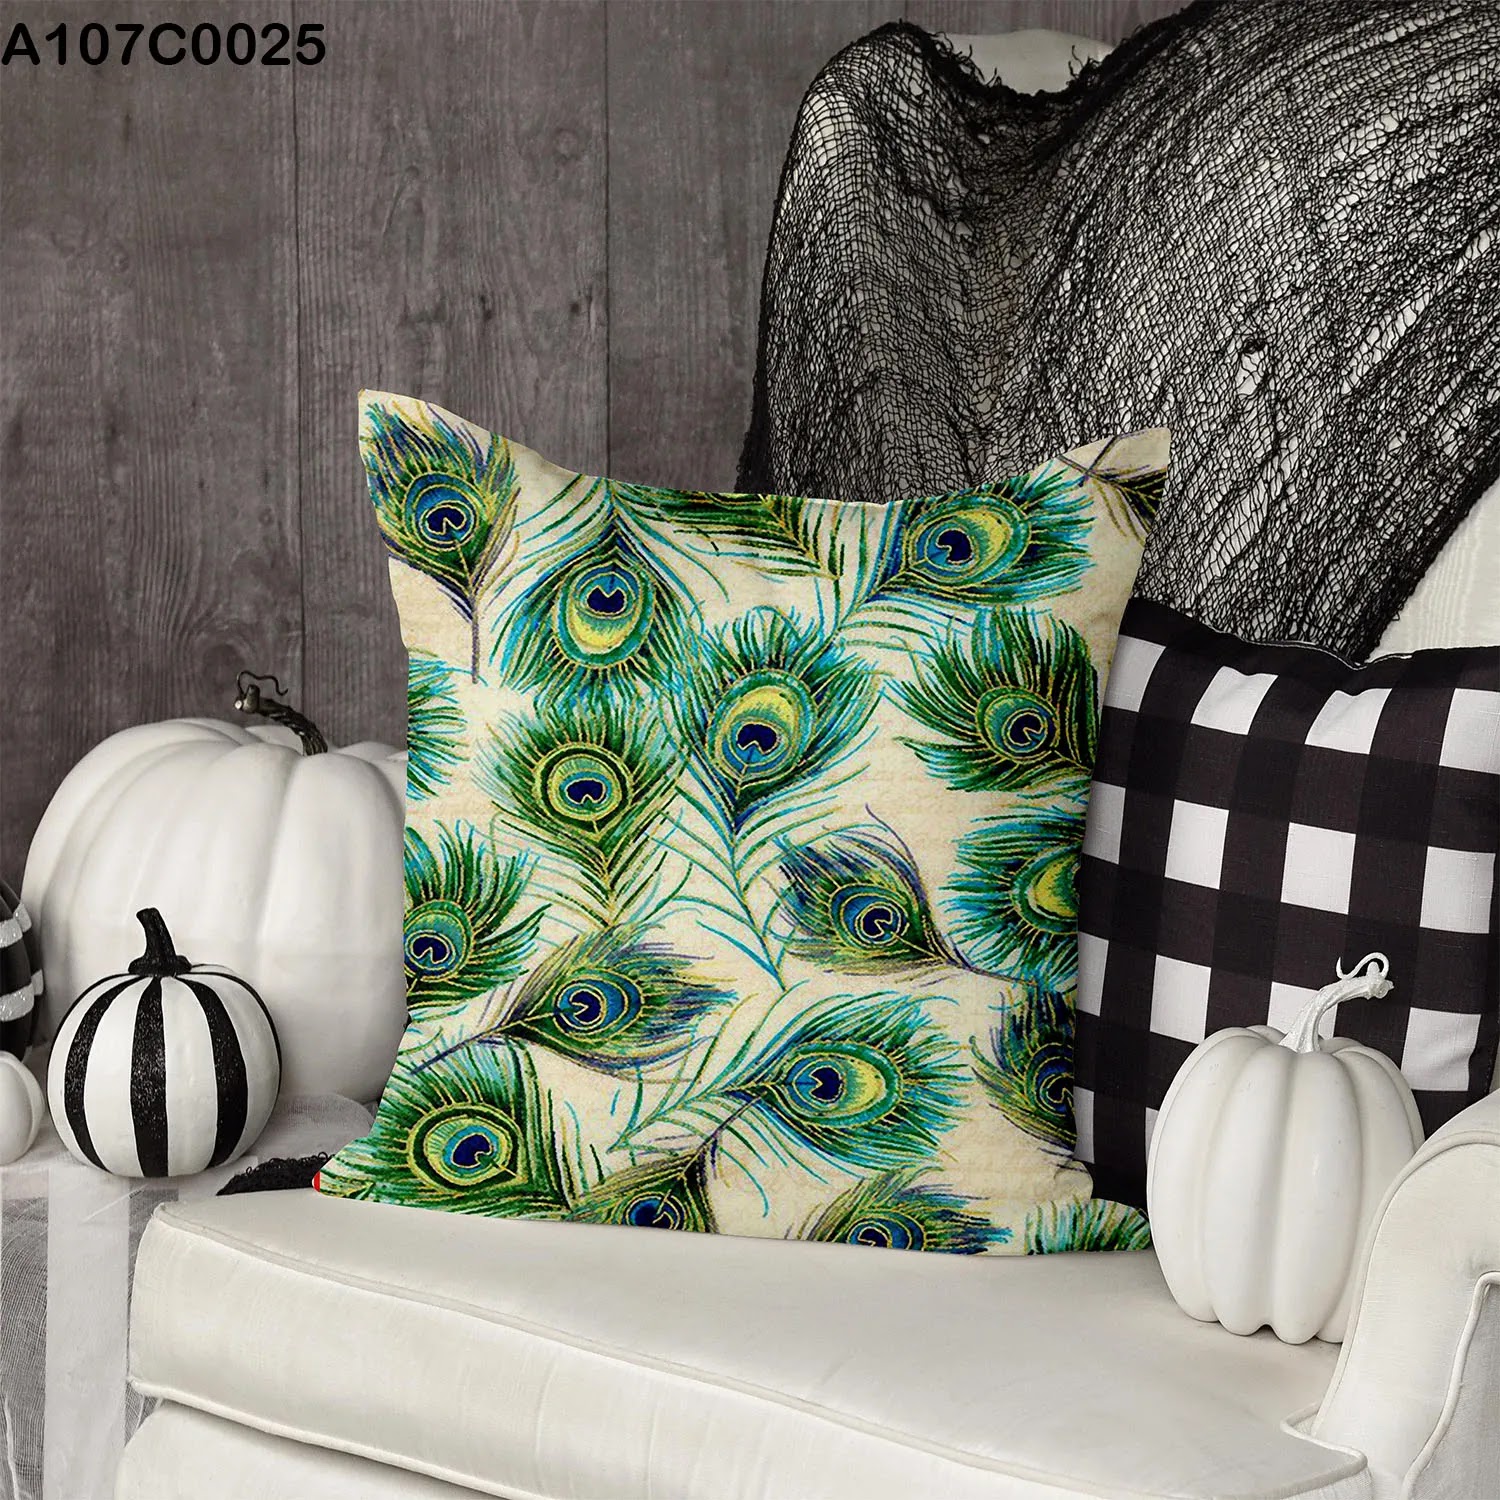 Pillow case with geen peacock feathers